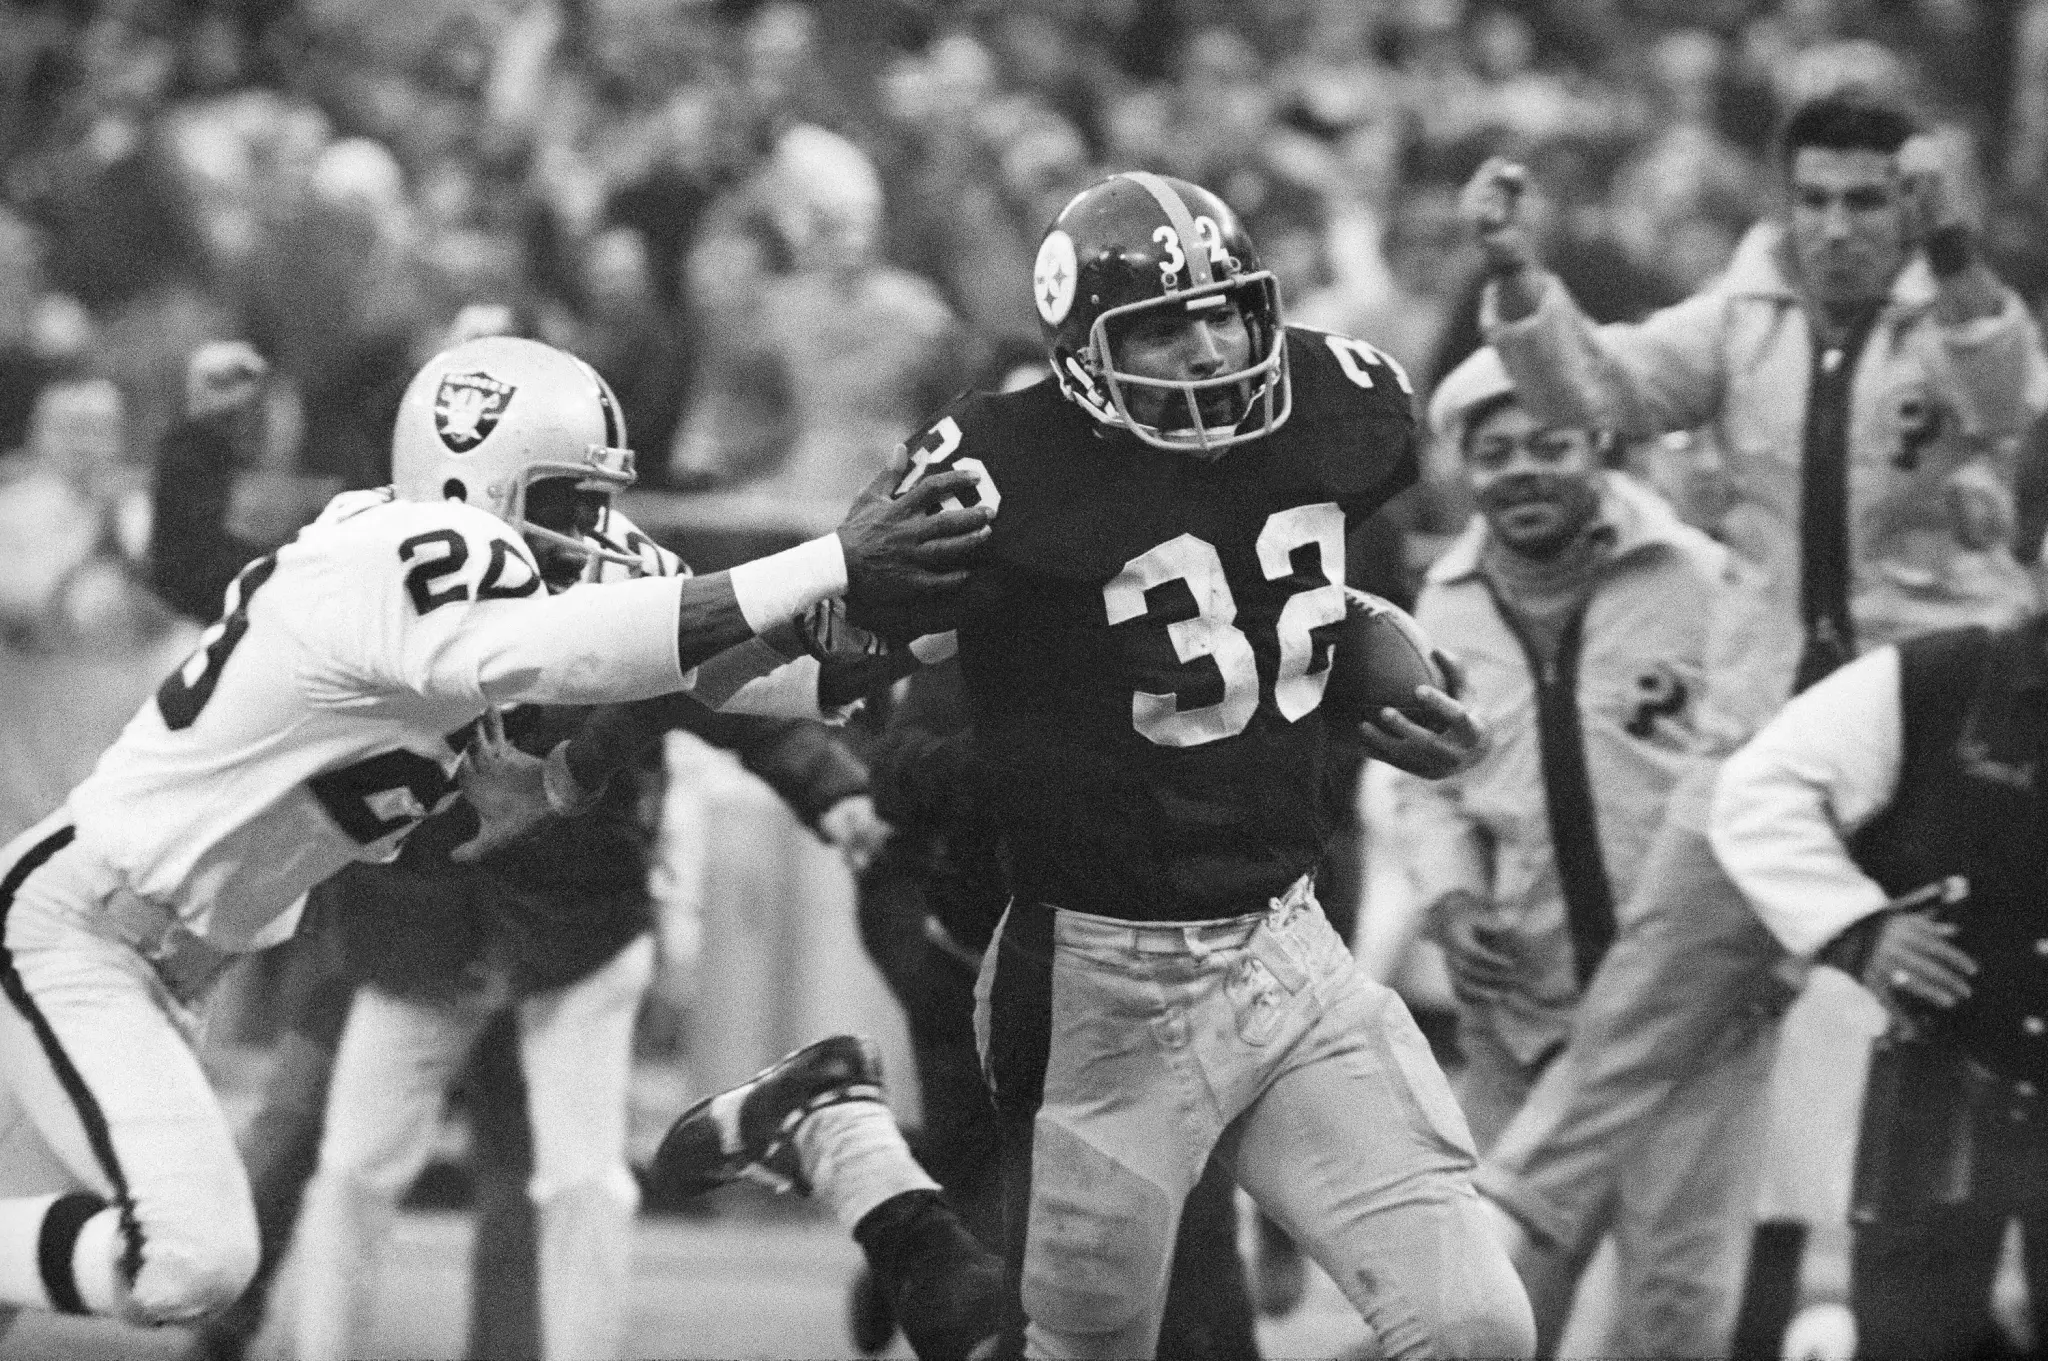 At 50, 'Immaculate Reception' still lifts a region's spirits